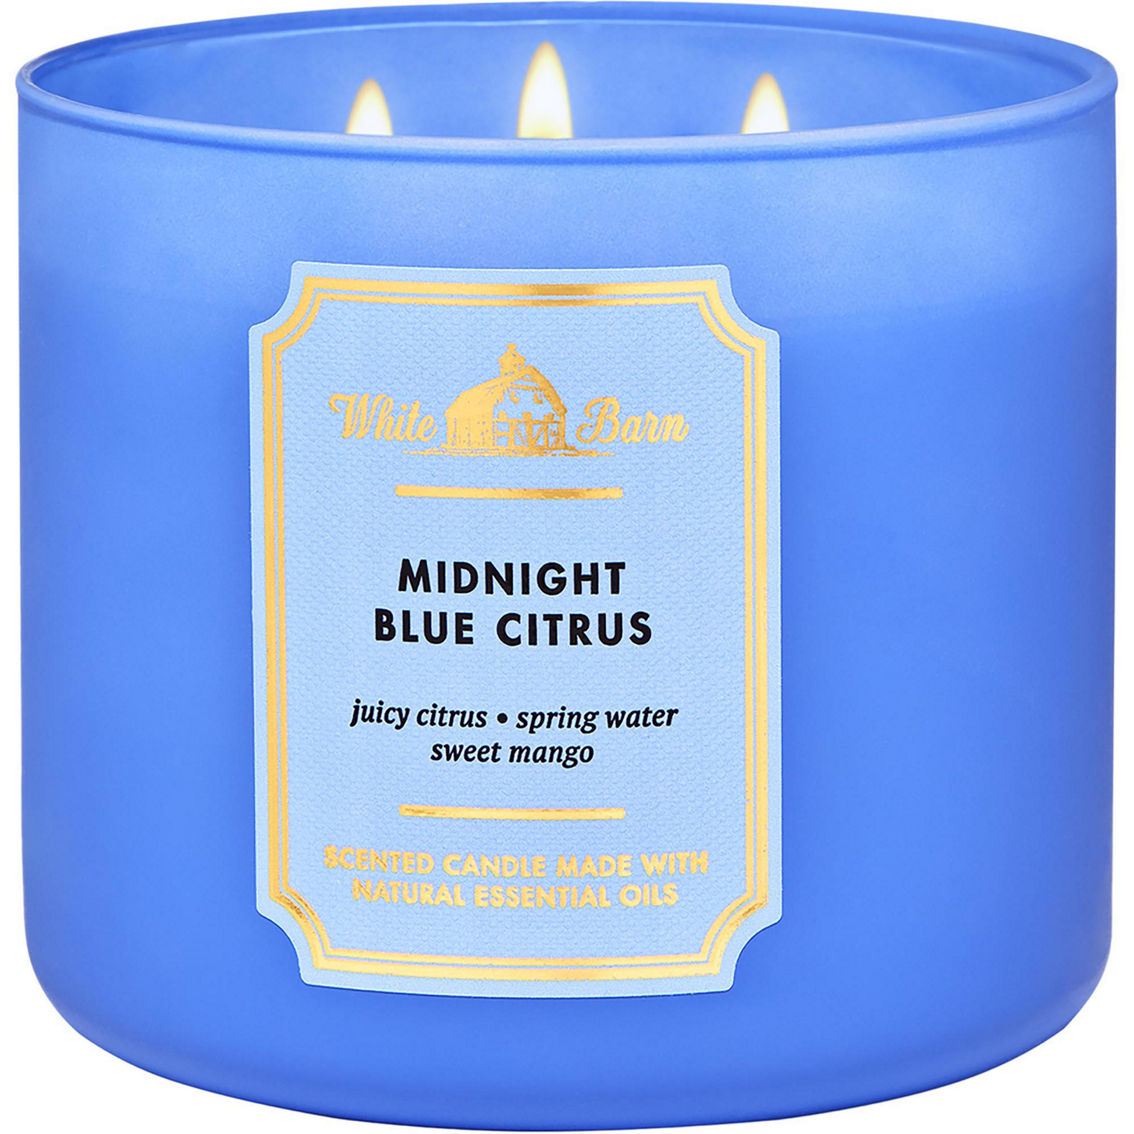 Bath Body Works Midnight Blue Citrus 3 Wick Candle Home